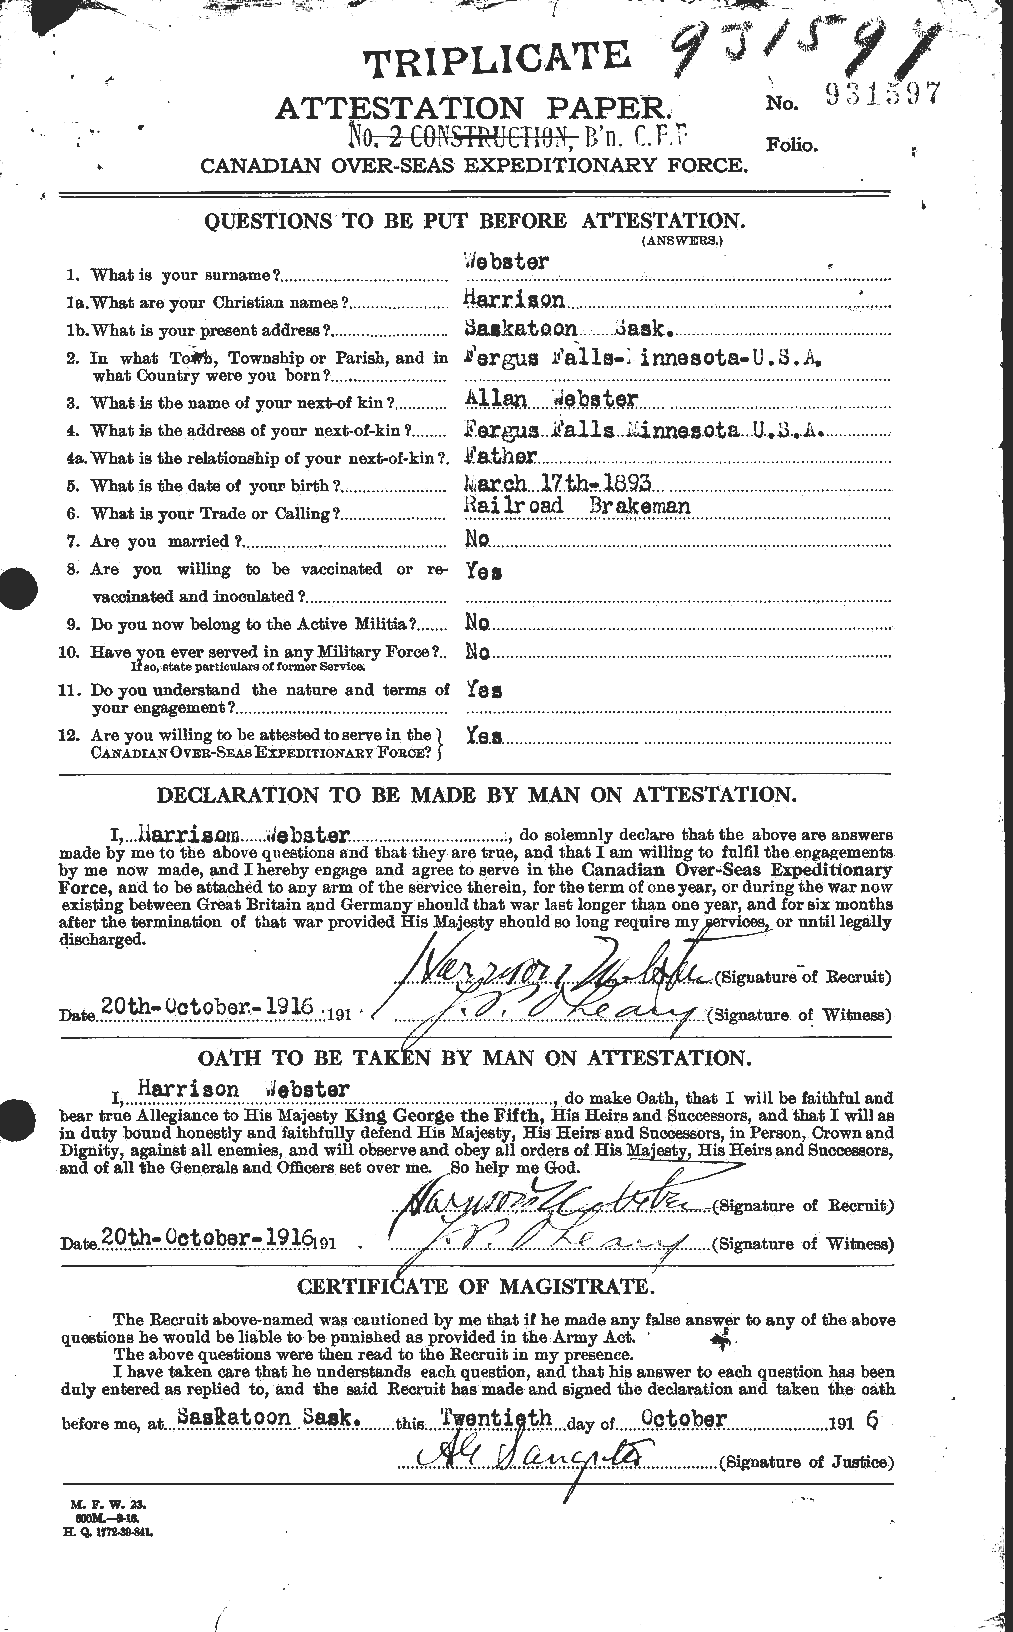 Personnel Records of the First World War - CEF 670408a